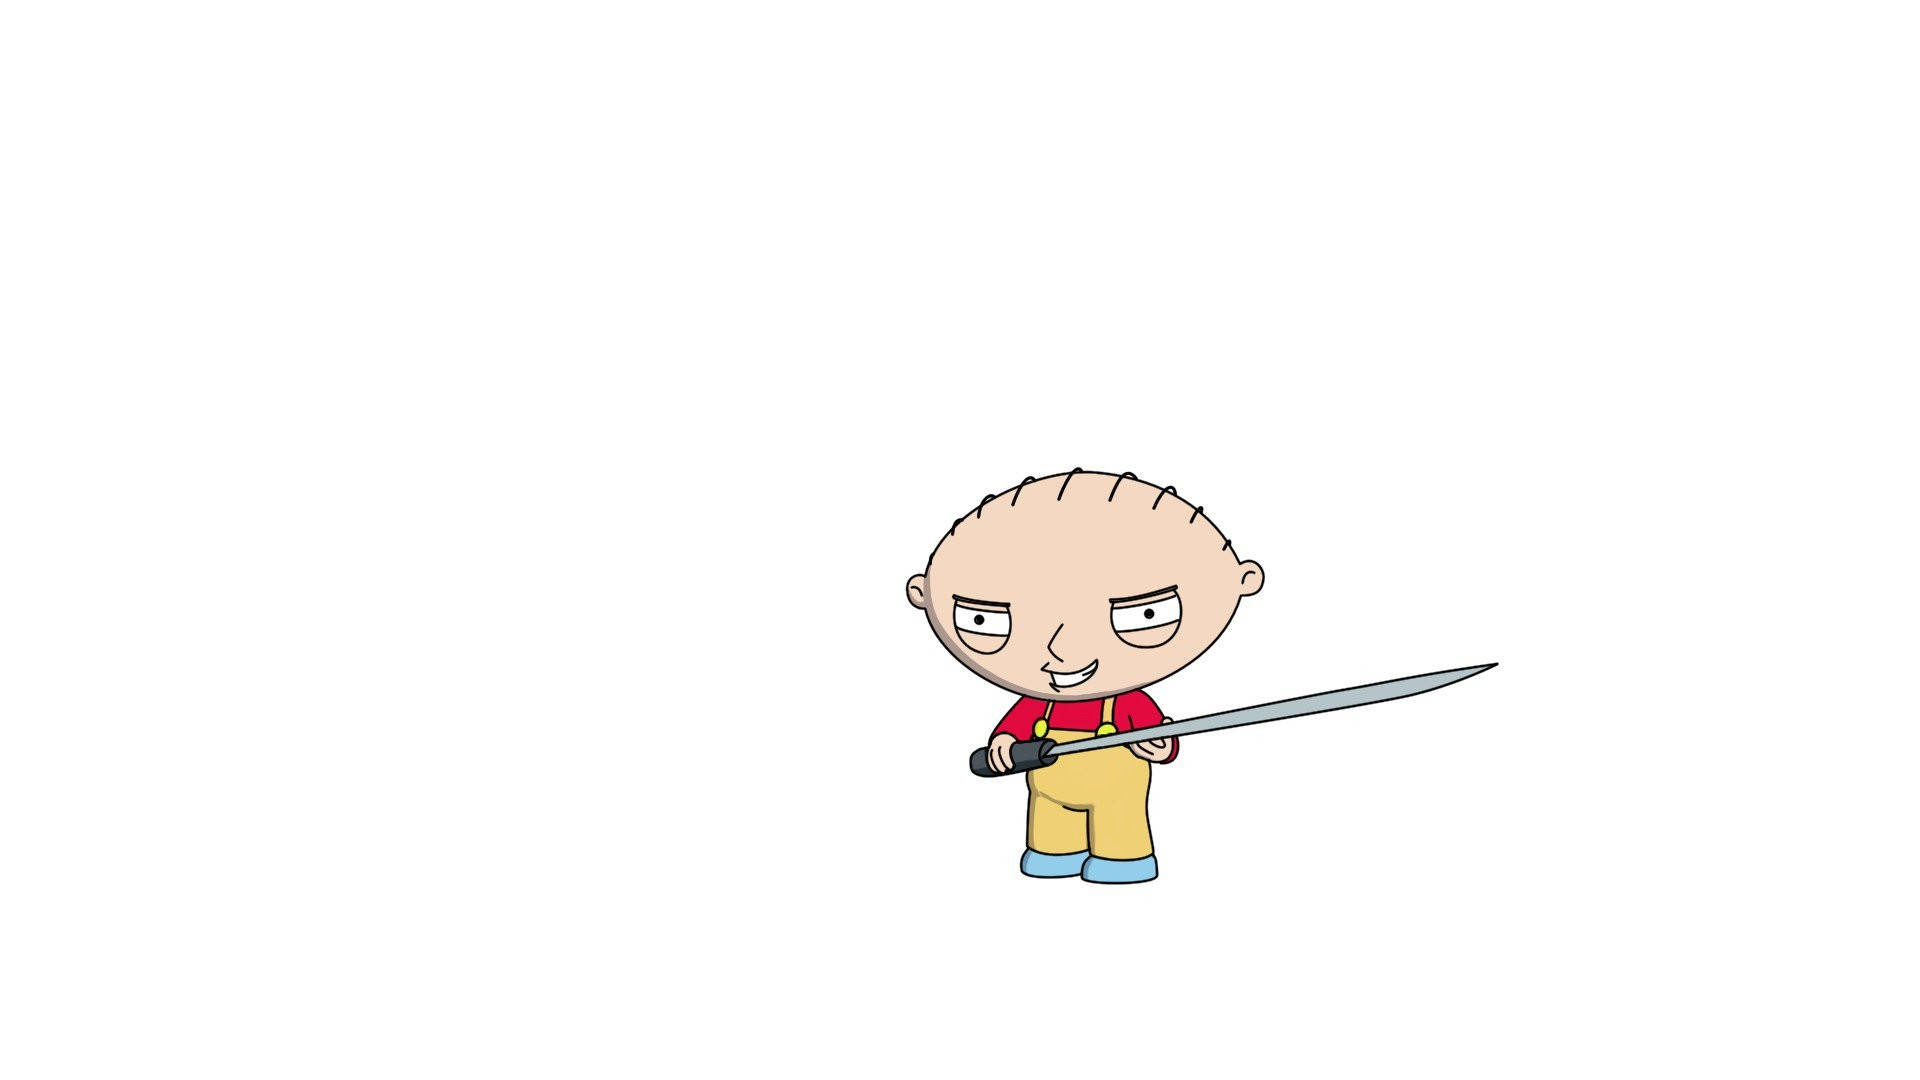 Caption: Adventurous Stewie Griffin With A Sword In Action Background